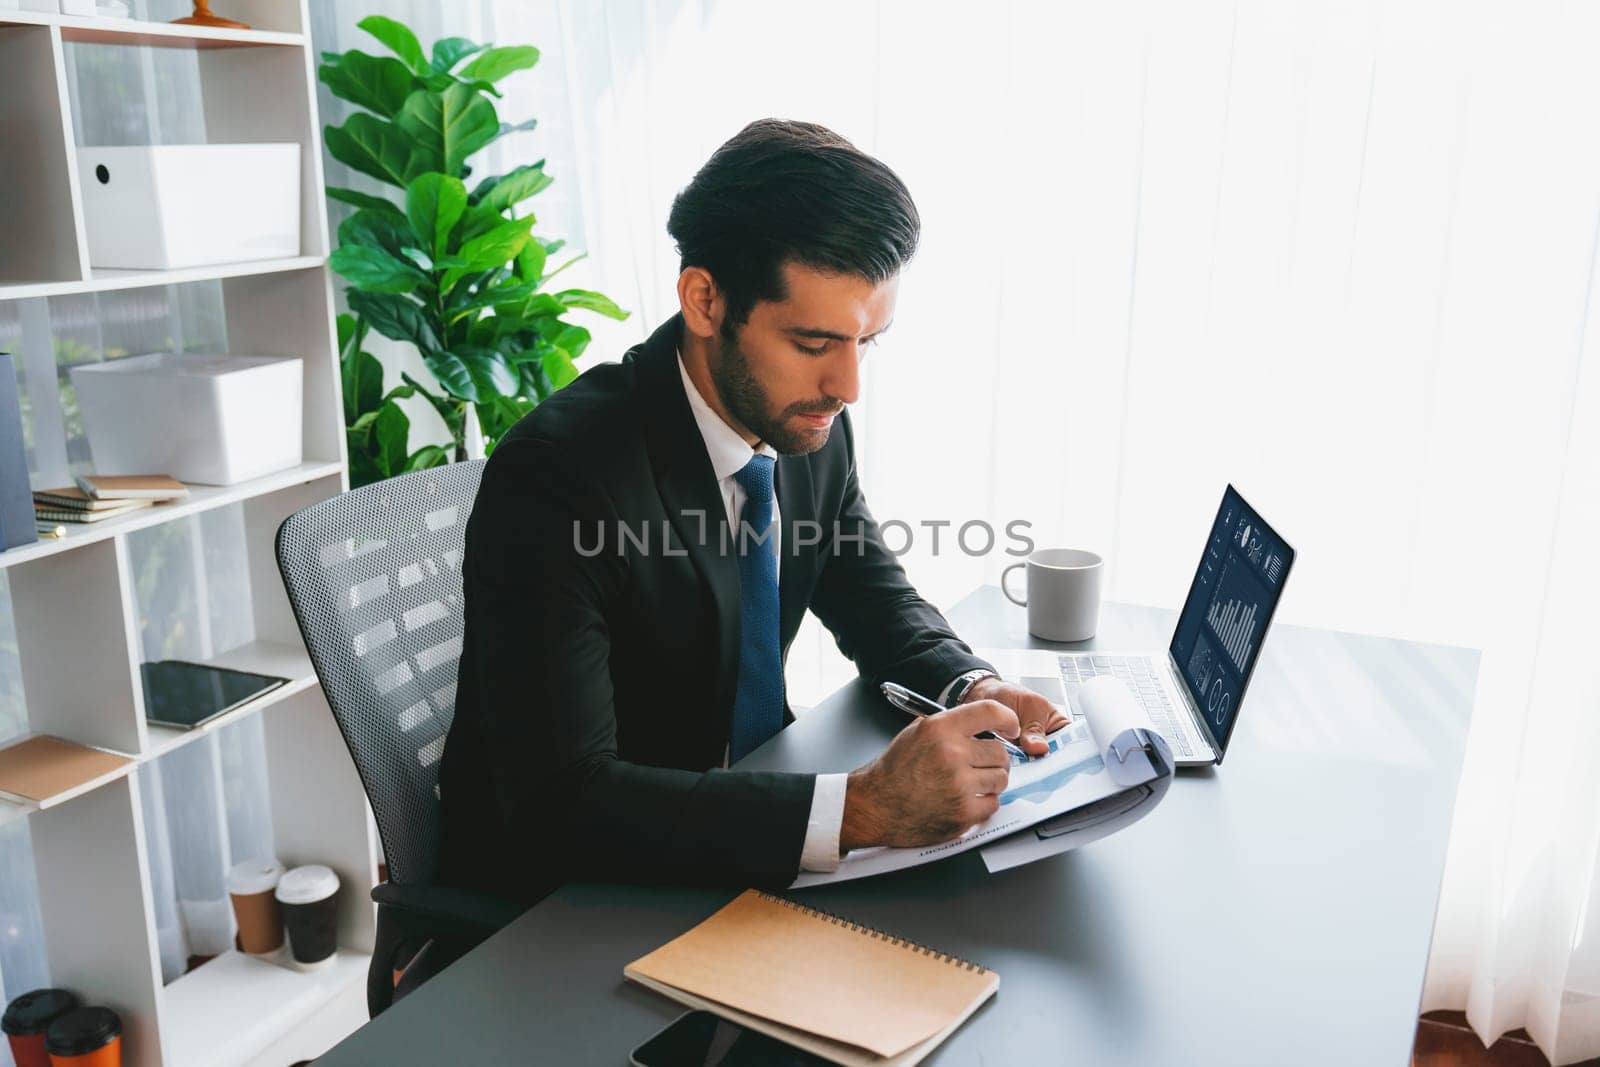 Modern professional businessman at modern office desk using laptop to work and write notes. Diligent office worker working on computer notebook in his office work space. fervent